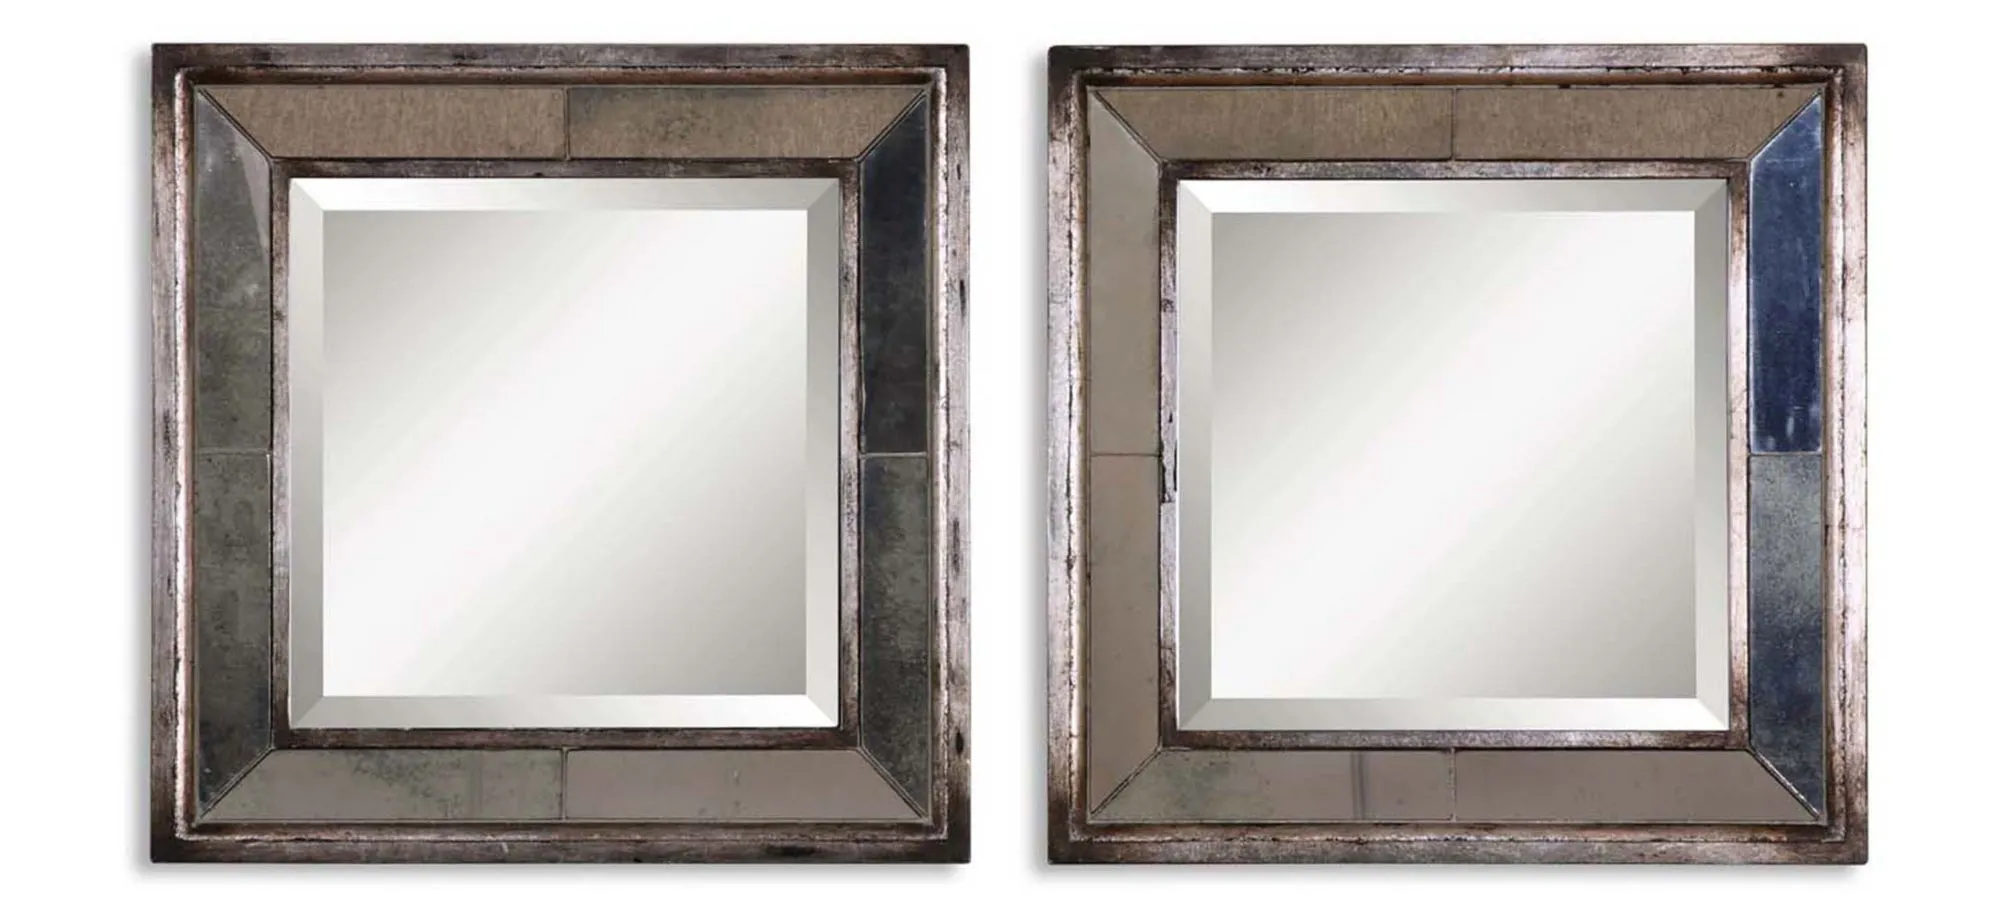 Davion Wall Mirror: Set of 2 in Antiqued Silver Leaf by Uttermost